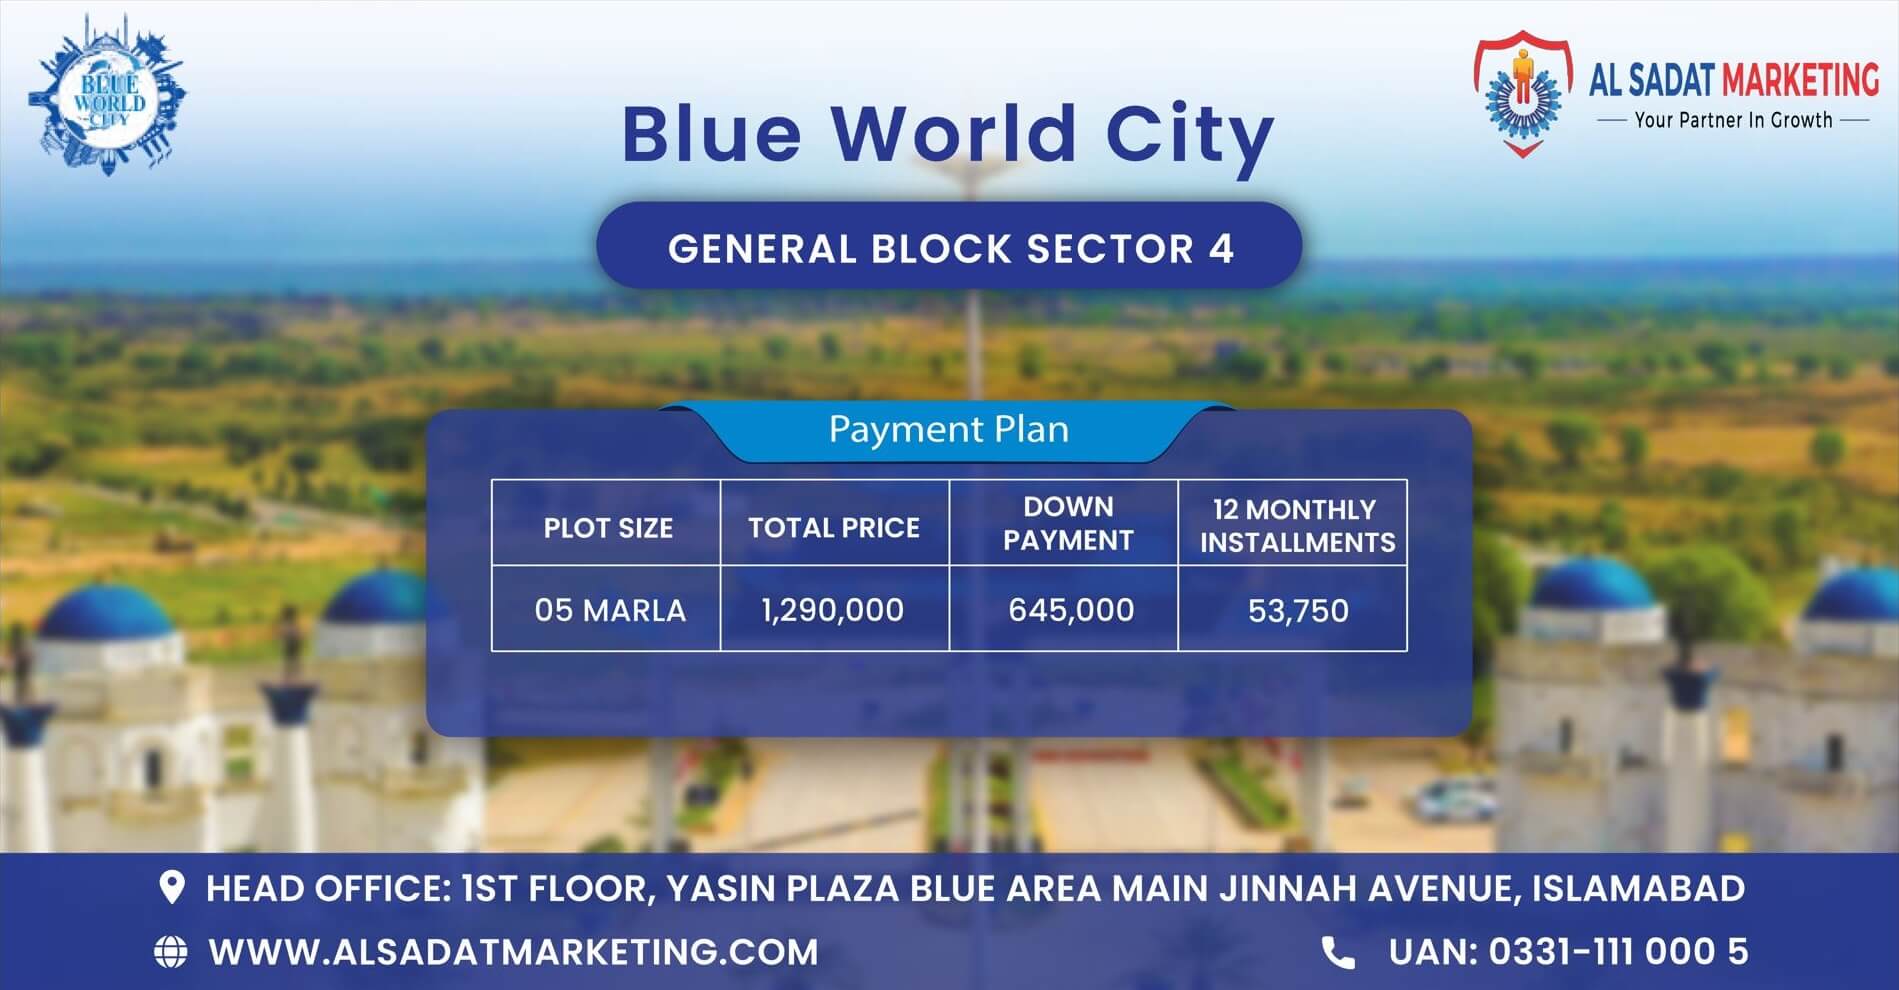 blue world city residential plots payment plan – blue world city islamabad residential plots payment plan – blue world city rawalpindi residential plots payment plan – blue world city general block sector 4 payment plan – blue world city islamabad general block sector 4 payment plan – blue world city rawalpindi general block sector 4 payment plan – blue world city payment plan – blue world city islamabad payment plan - blue world city rawalpindi payment plan – blue world city– blue world city islamabad – blue world city rawalpindi– blue world city housing society – blue world city islamabad housing society – blue world city real estate project – blue world city islamabad real estate project - al sadat marketing - alsadat marketing - al-sadat marketing